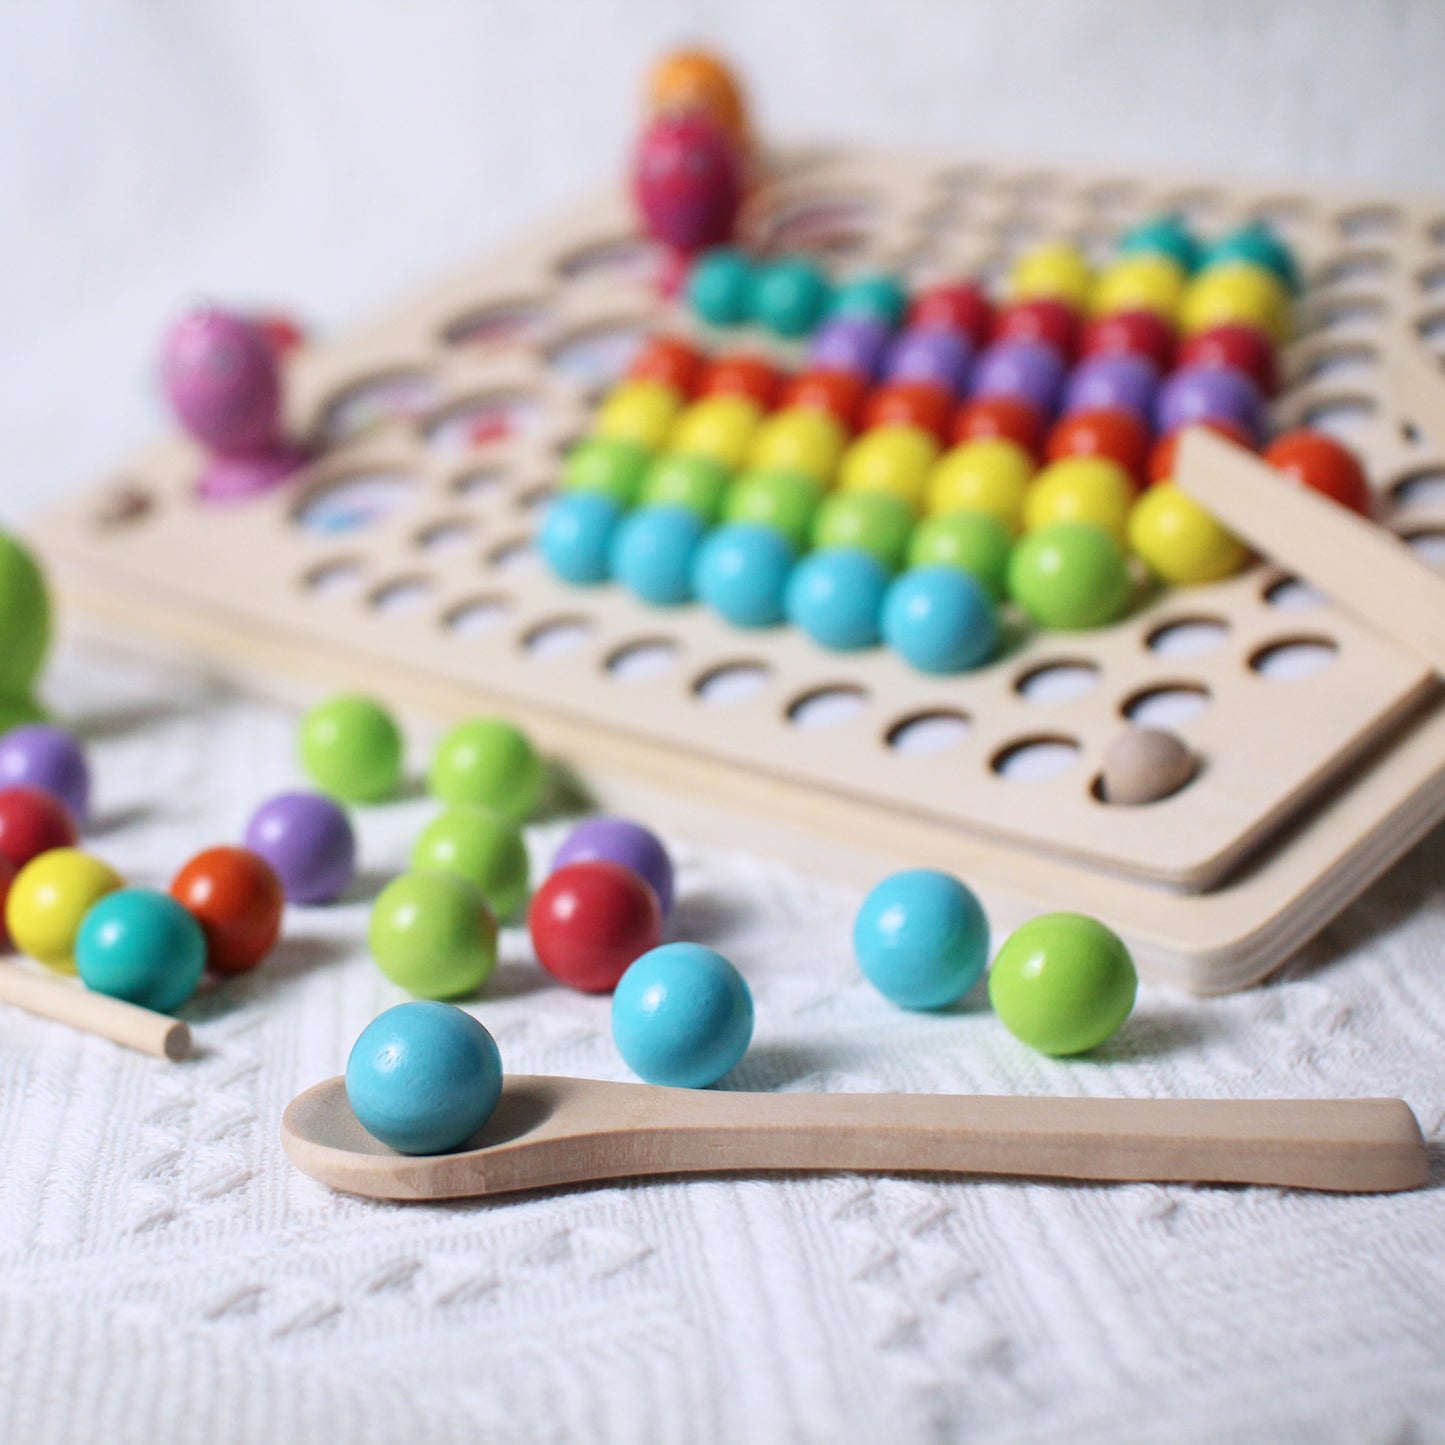 creating picture with colourful wooden balls sorting game and colourful wooden fishes fishing memory game, chopsticks, thong, spoon, fishing rod and silicone cups provided for fun and educational experience